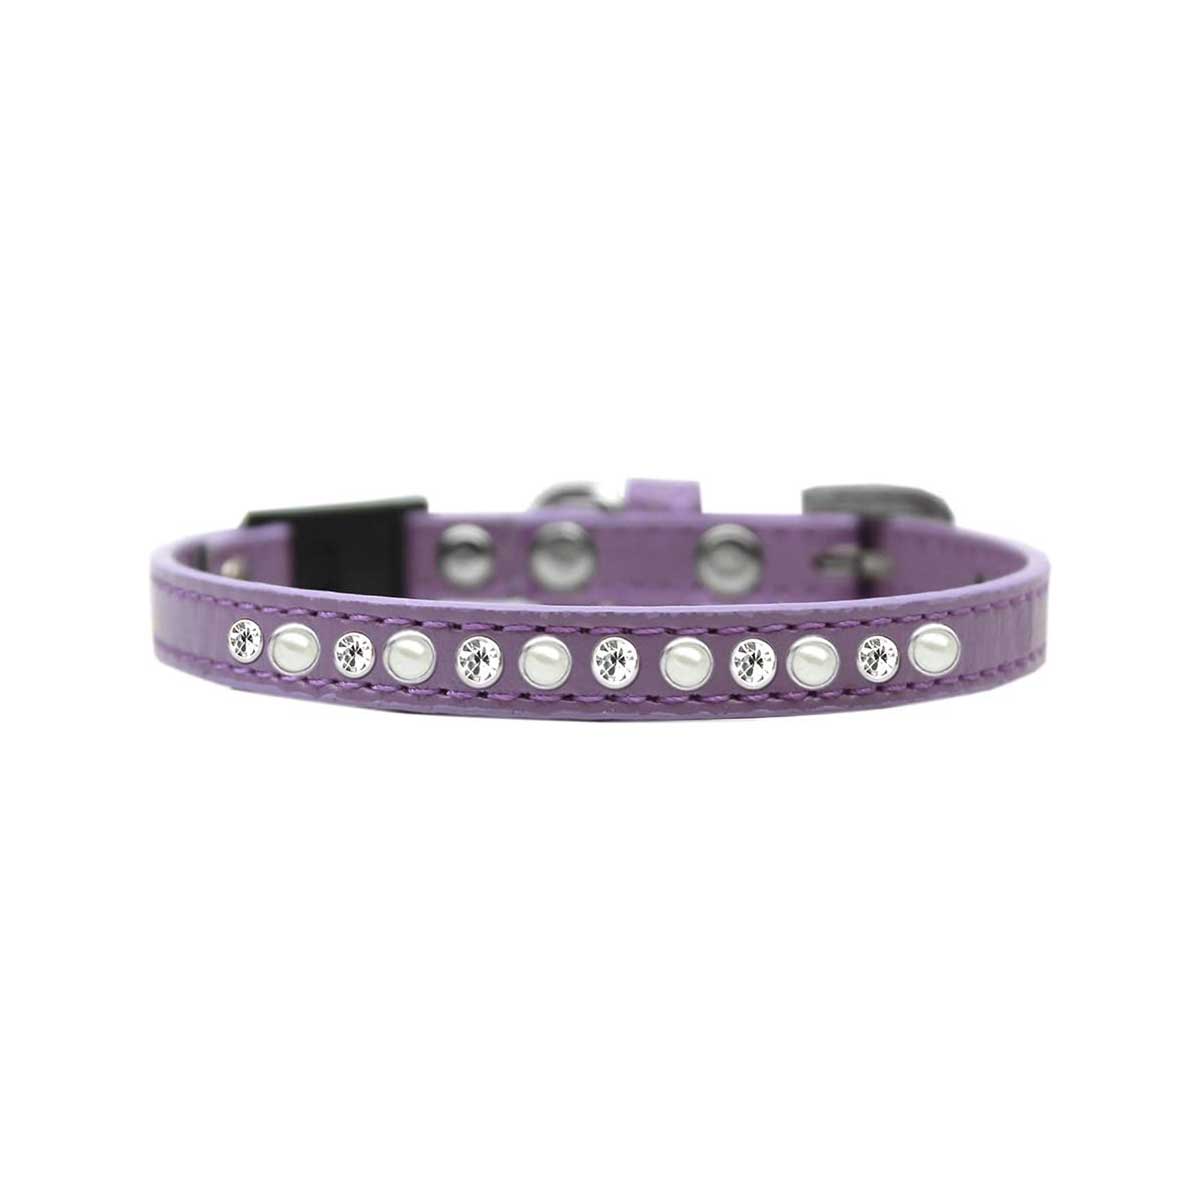 Pearl and Rhinestone Cat Safety Collar in Lavender | Pawlicious & Company